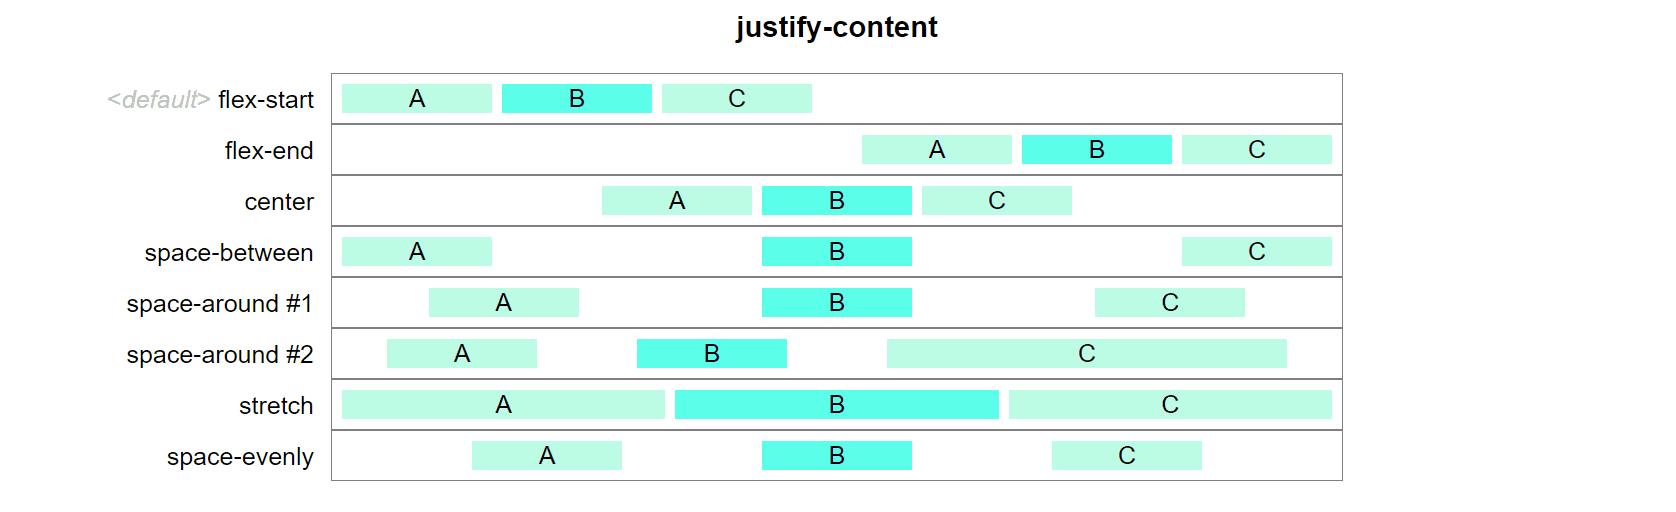 Flex justify-content. Justify-content: Space-between;. Justify-content: Flex-start;. Justify-content: Flex-end. Justify content space